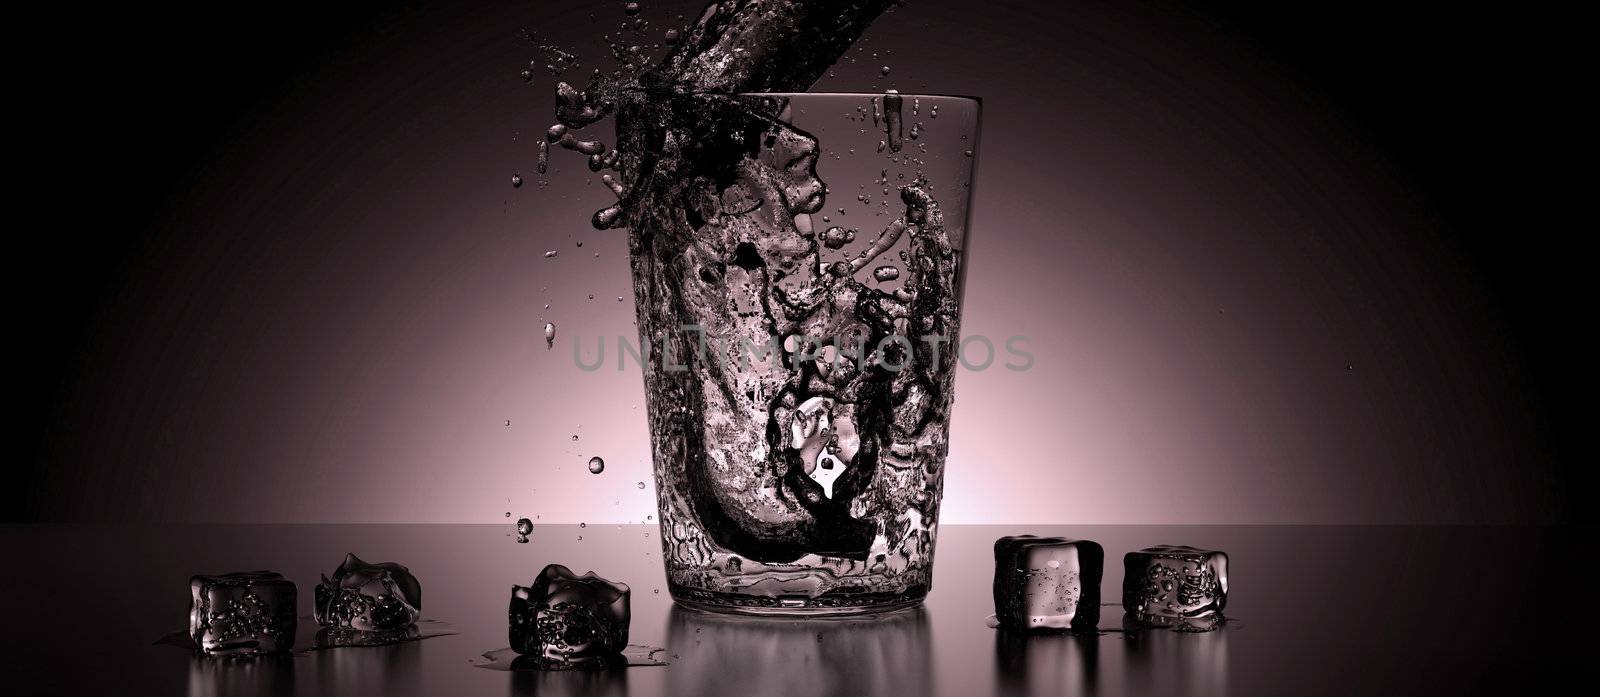 Image of water splashin inside of a glass on a colorful gradient background.